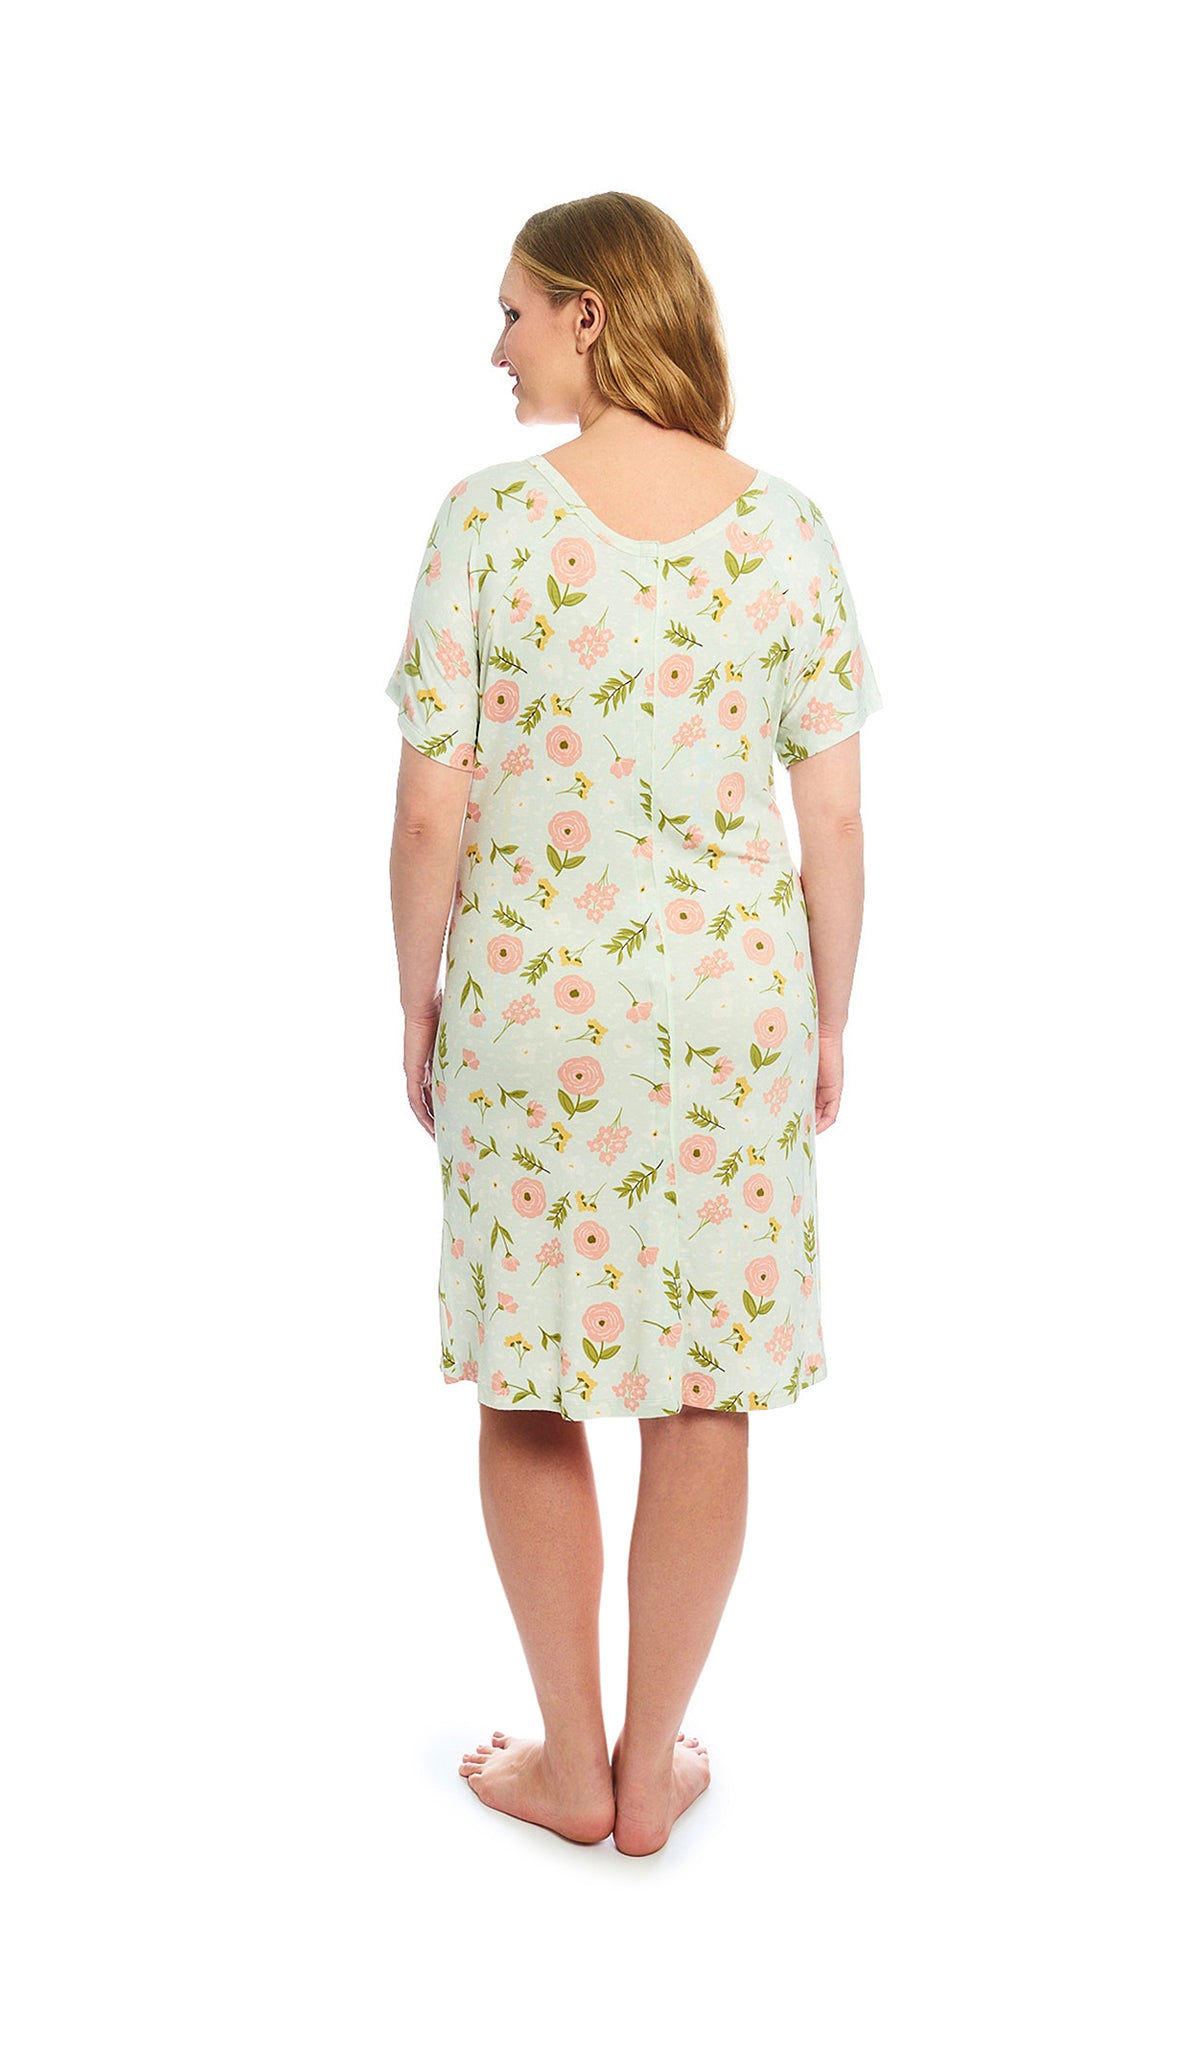 Carnation Rosa hospital gown. Back shot of woman wearing hospital gown with full-length snap-back opening.